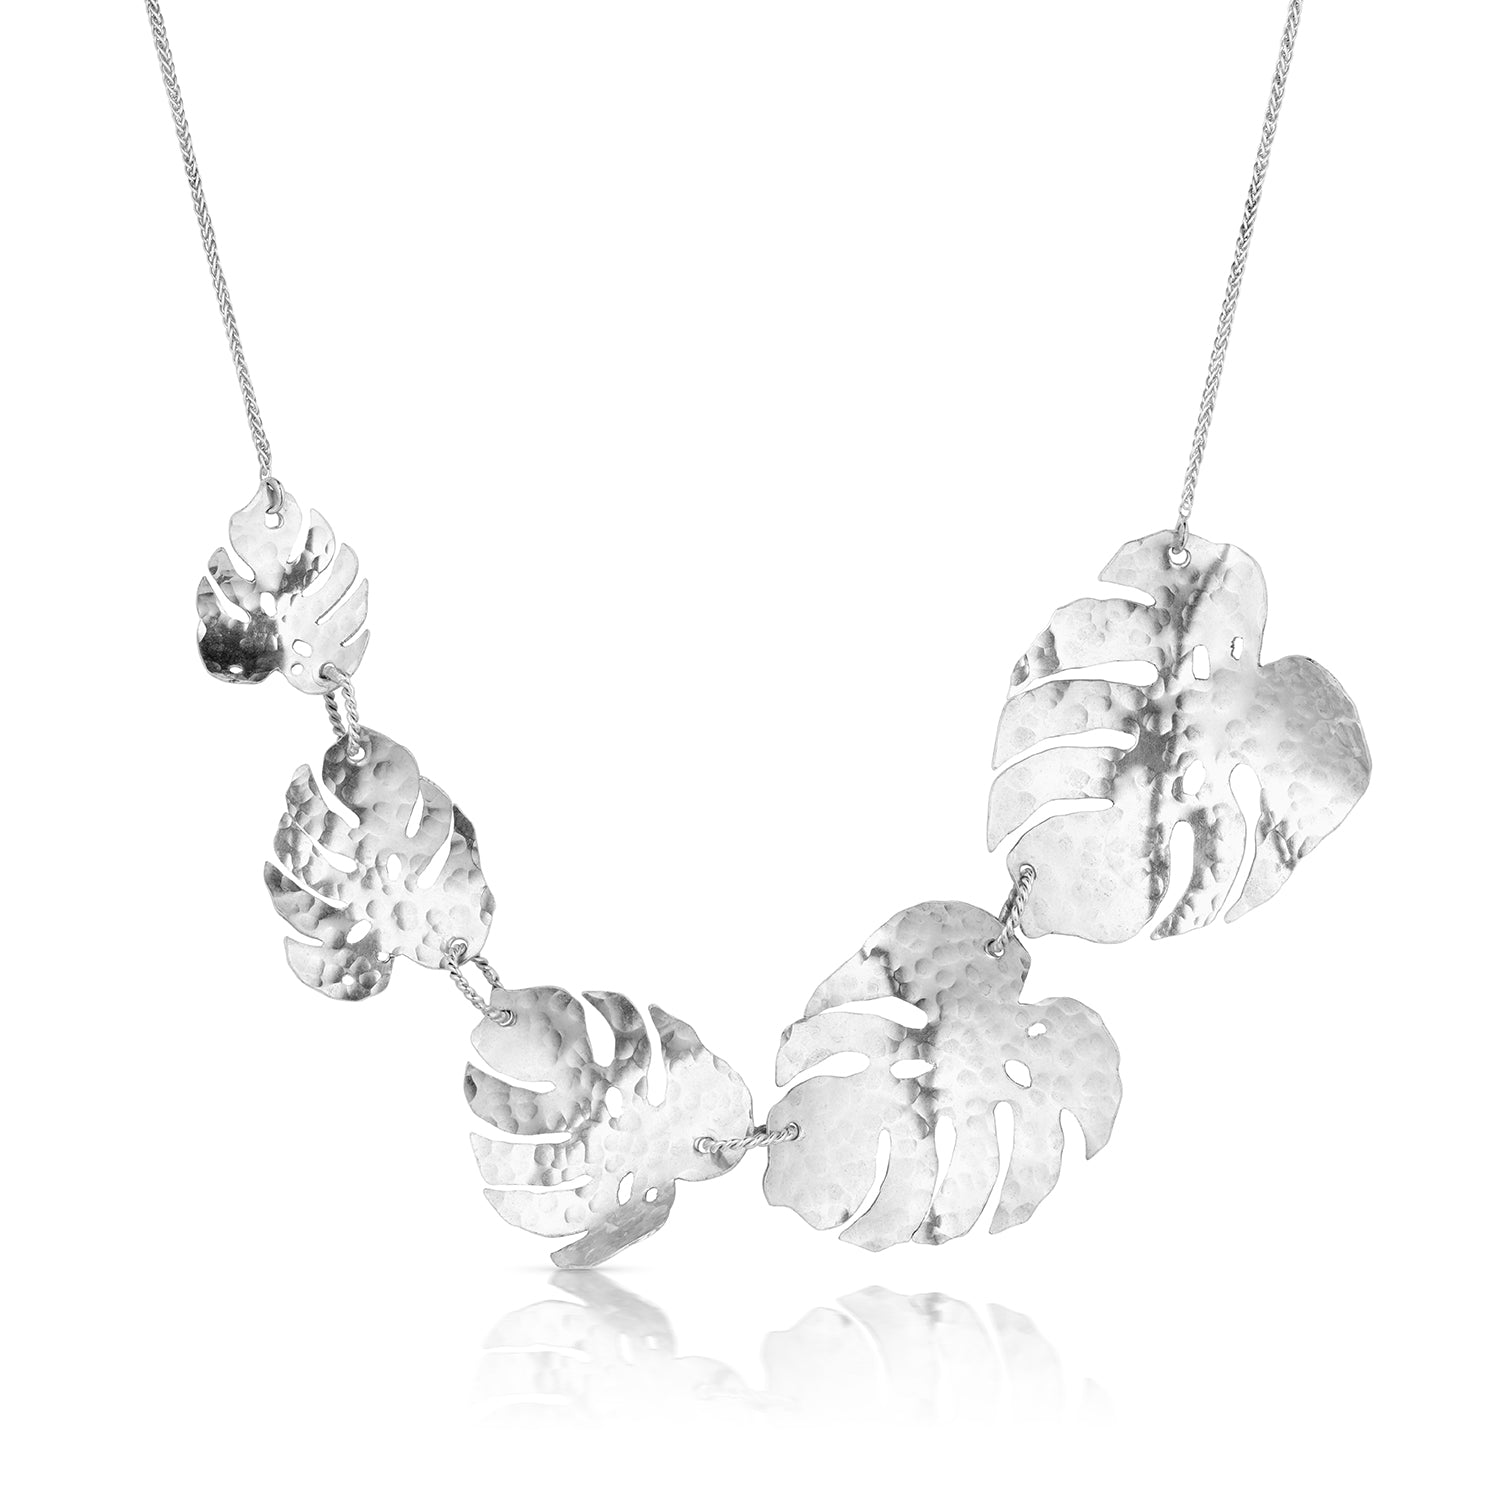 Sterling Silver Monstera 5-Leaf Necklace with Eye-Catching Hammered Details